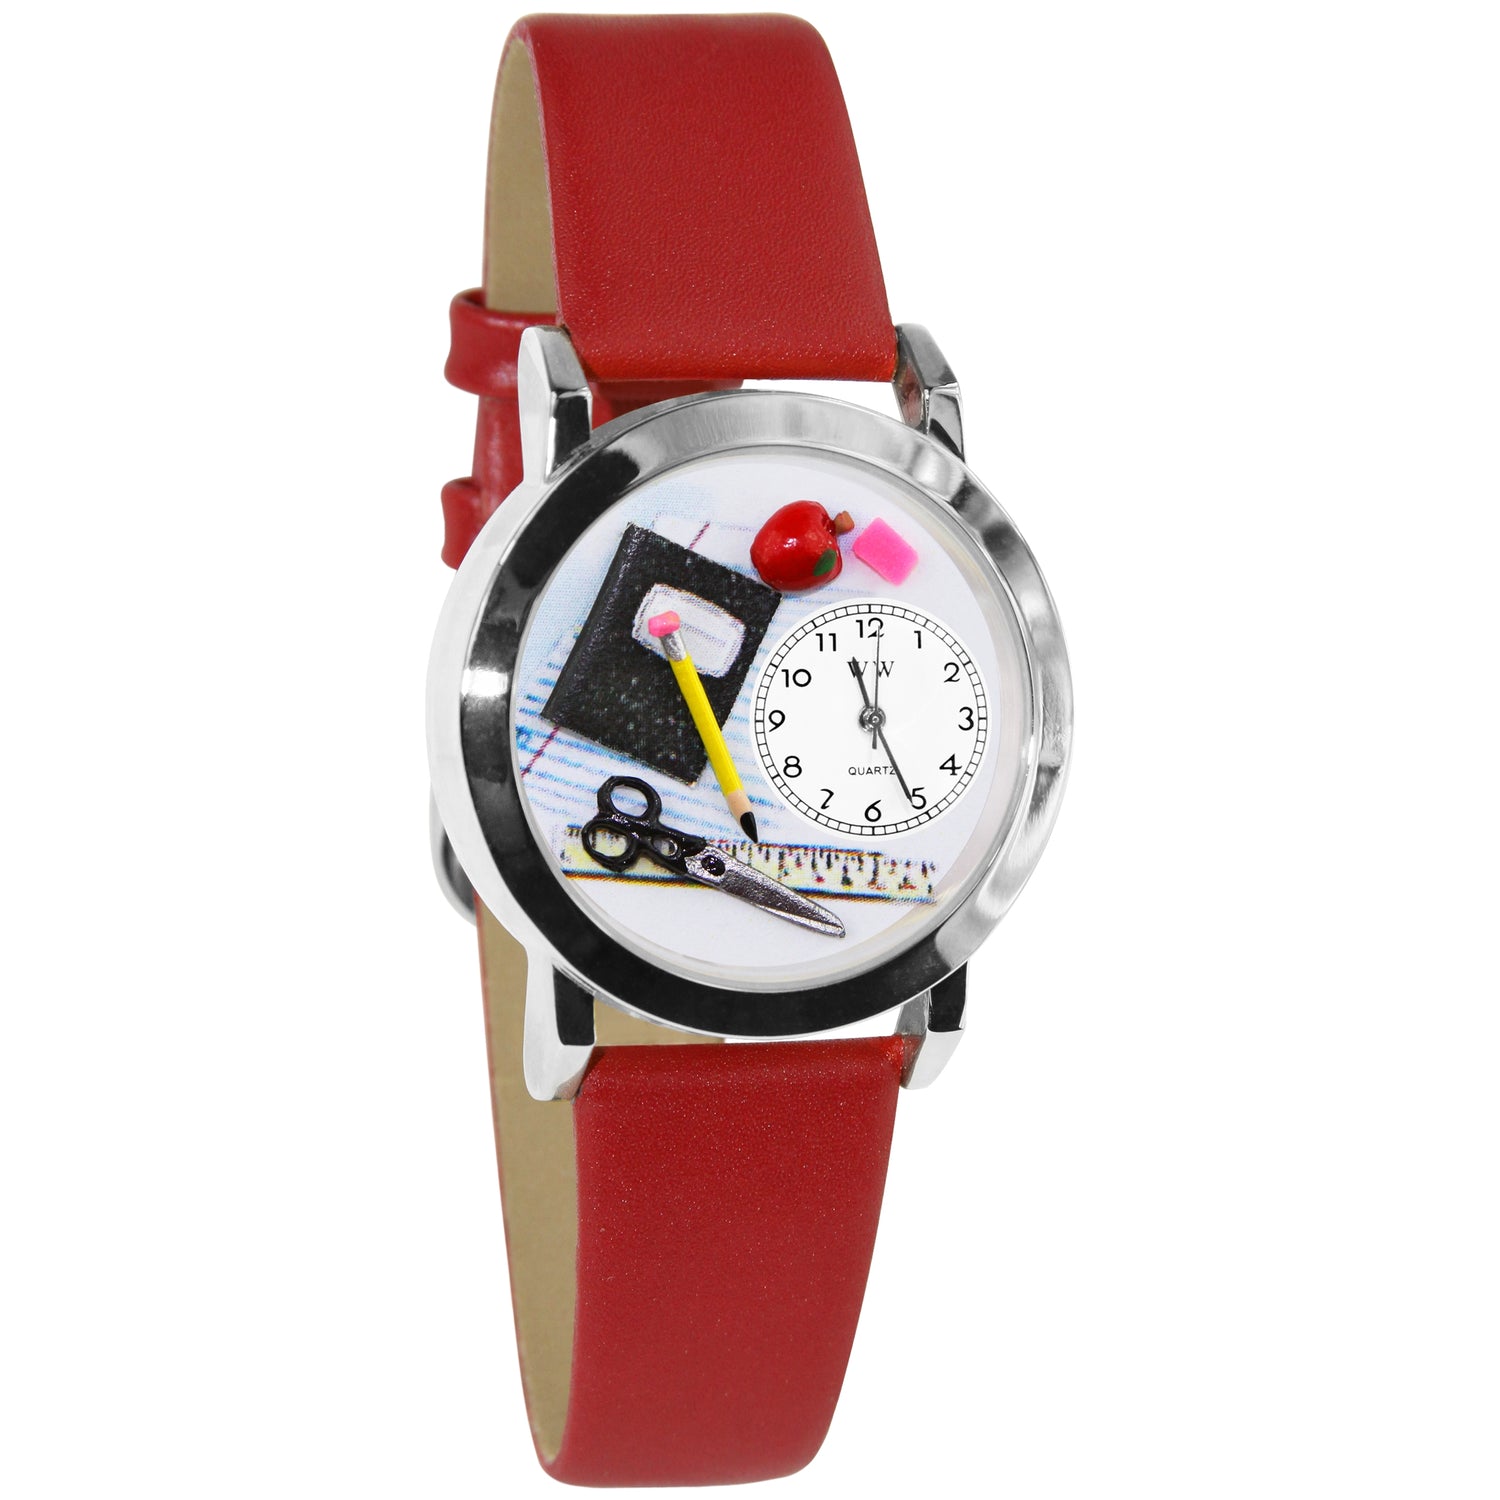 Whimsical Gifts | Teacher Classic 3D Watch Small Style | Handmade in USA | Professions Themed | Teacher | Novelty Unique Fun Miniatures Gift | Silver Finish Red Leather Watch Band